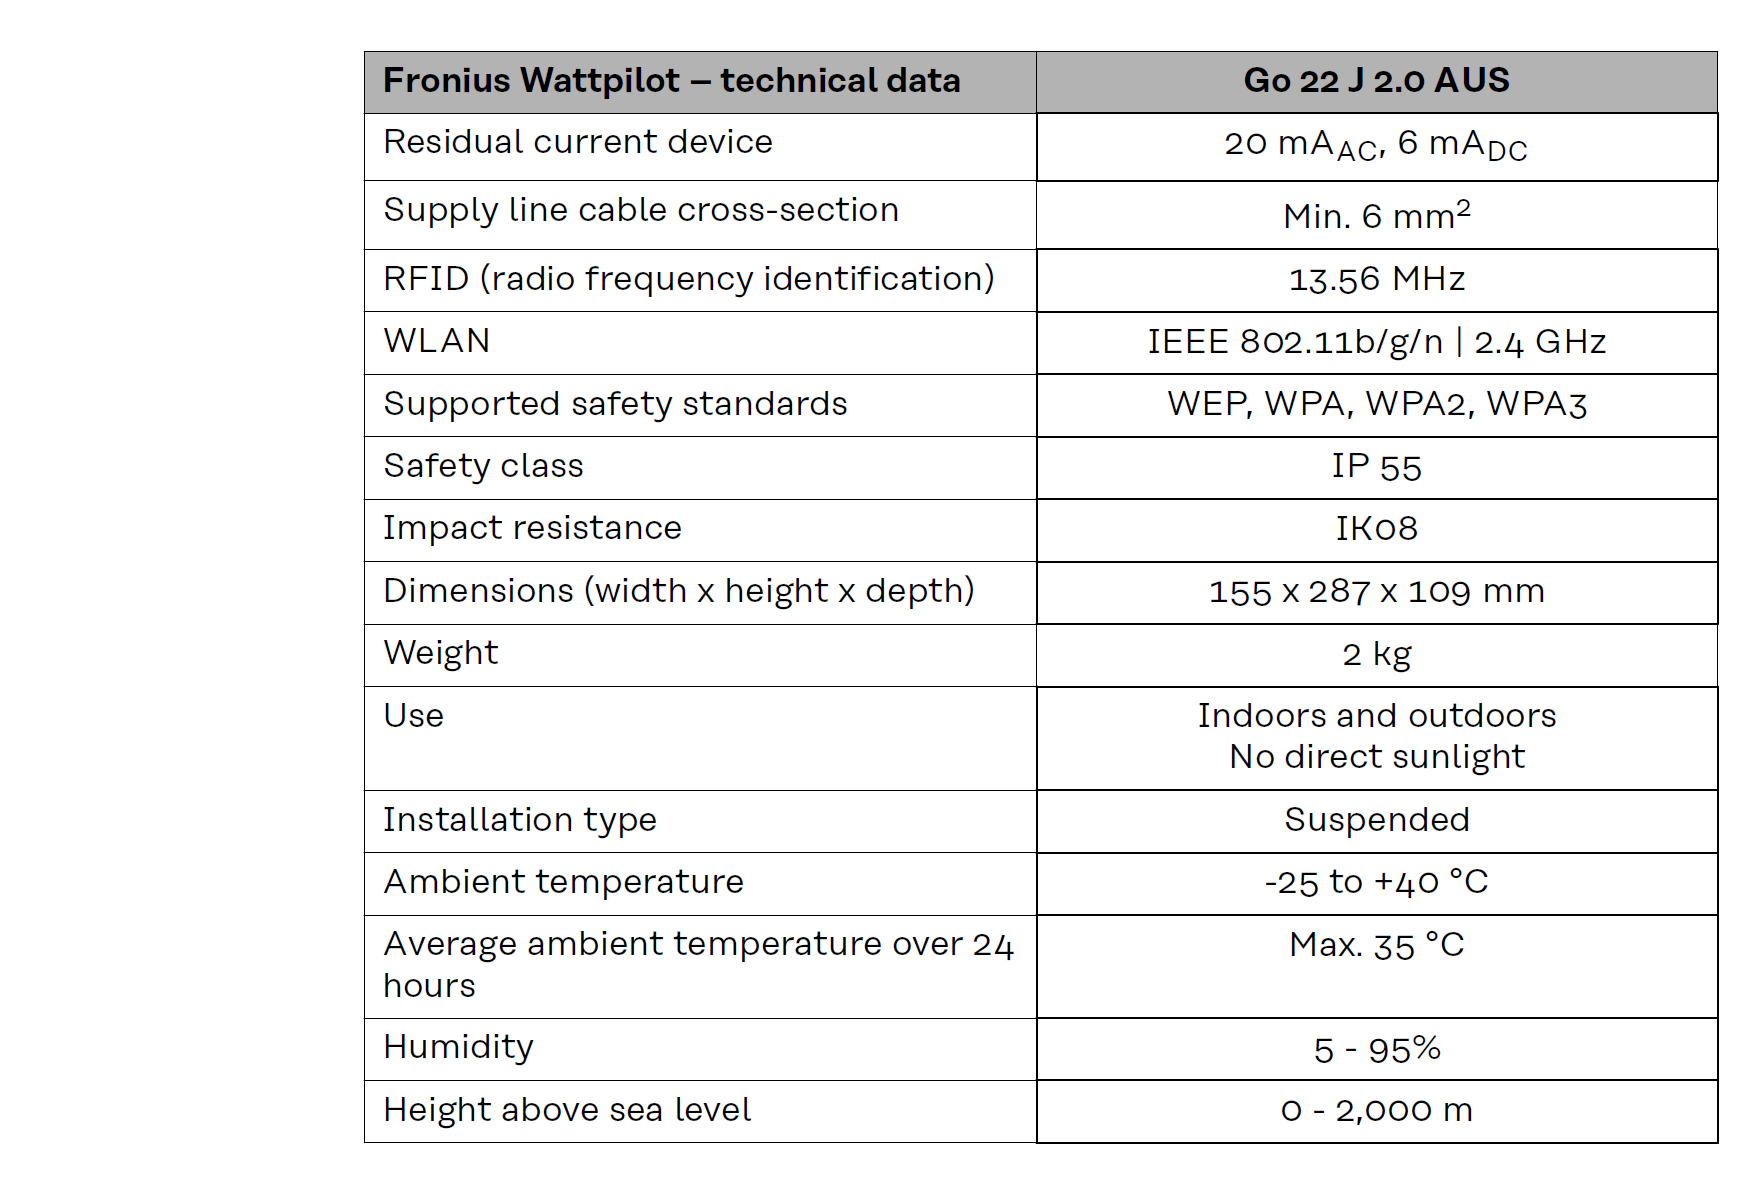 Fronius Wattpilot Tech Data Specification from Operating Manual pg 2